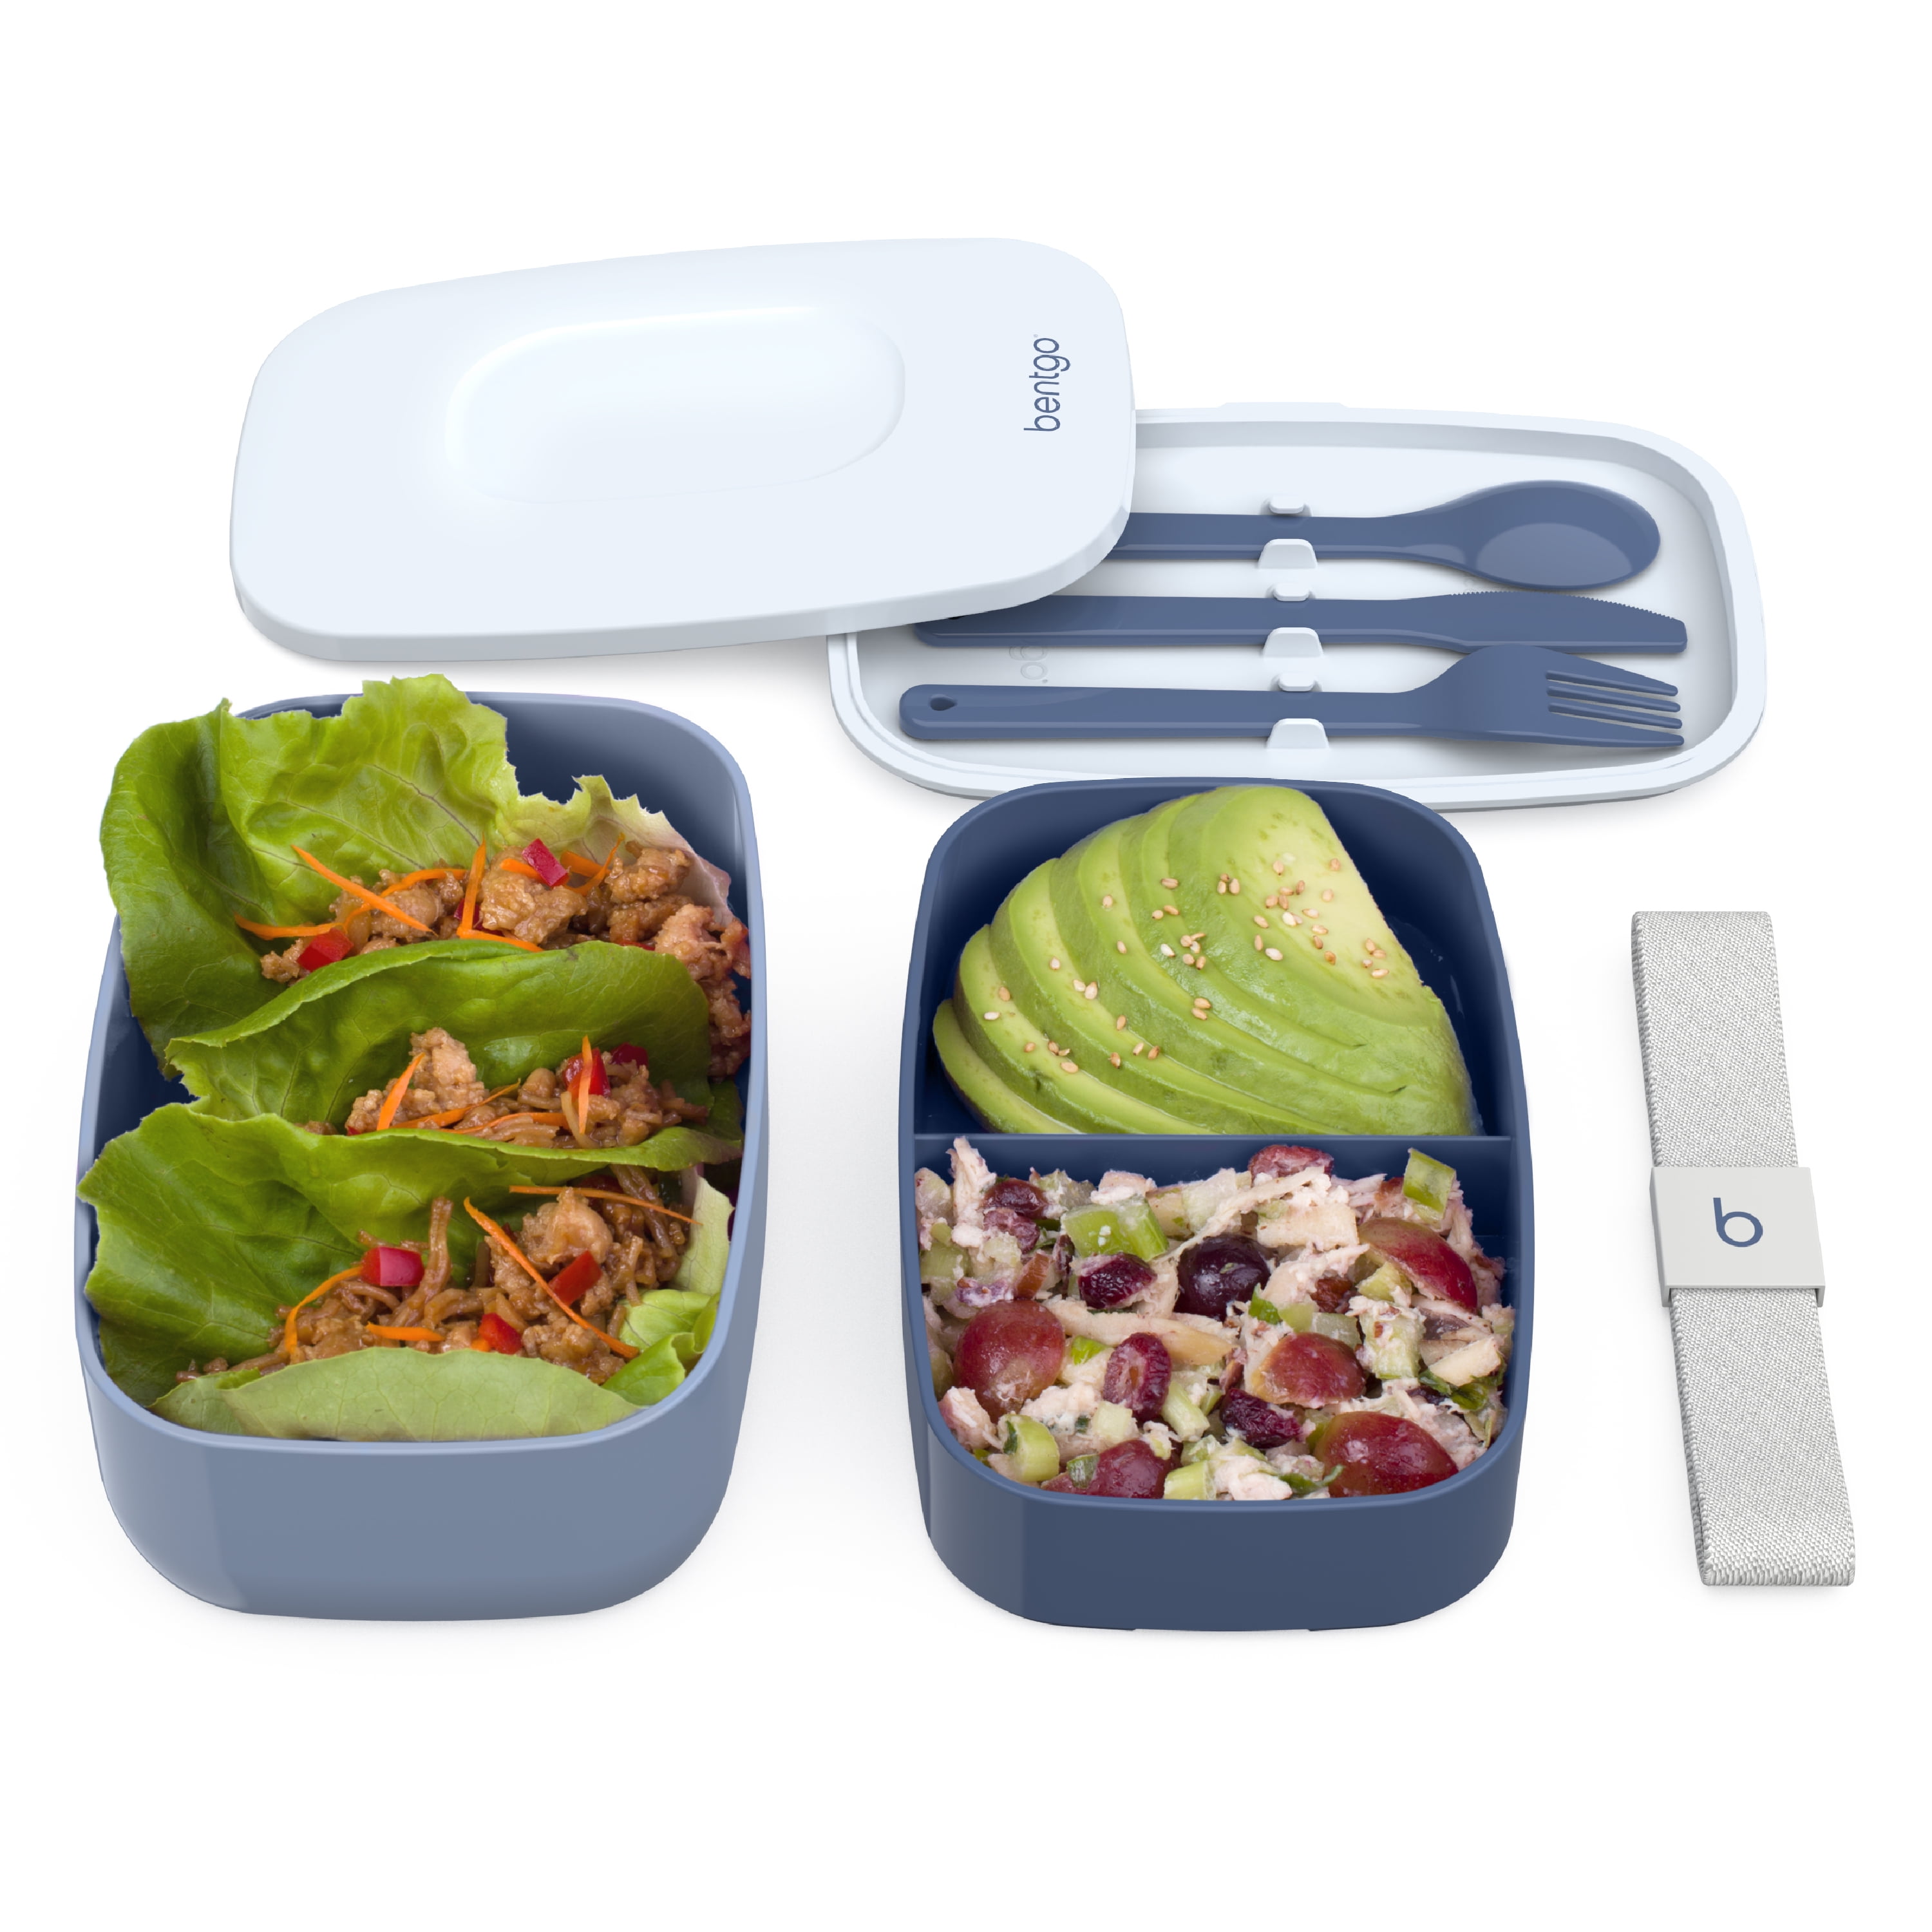  Bentgo® Classic - Adult Bento Box, All-in-One Stackable Lunch  Box Container with 3 Compartments, Plastic Utensils, and Nylon Sealing  Strap, BPA Free Food Container (Blue): Home & Kitchen